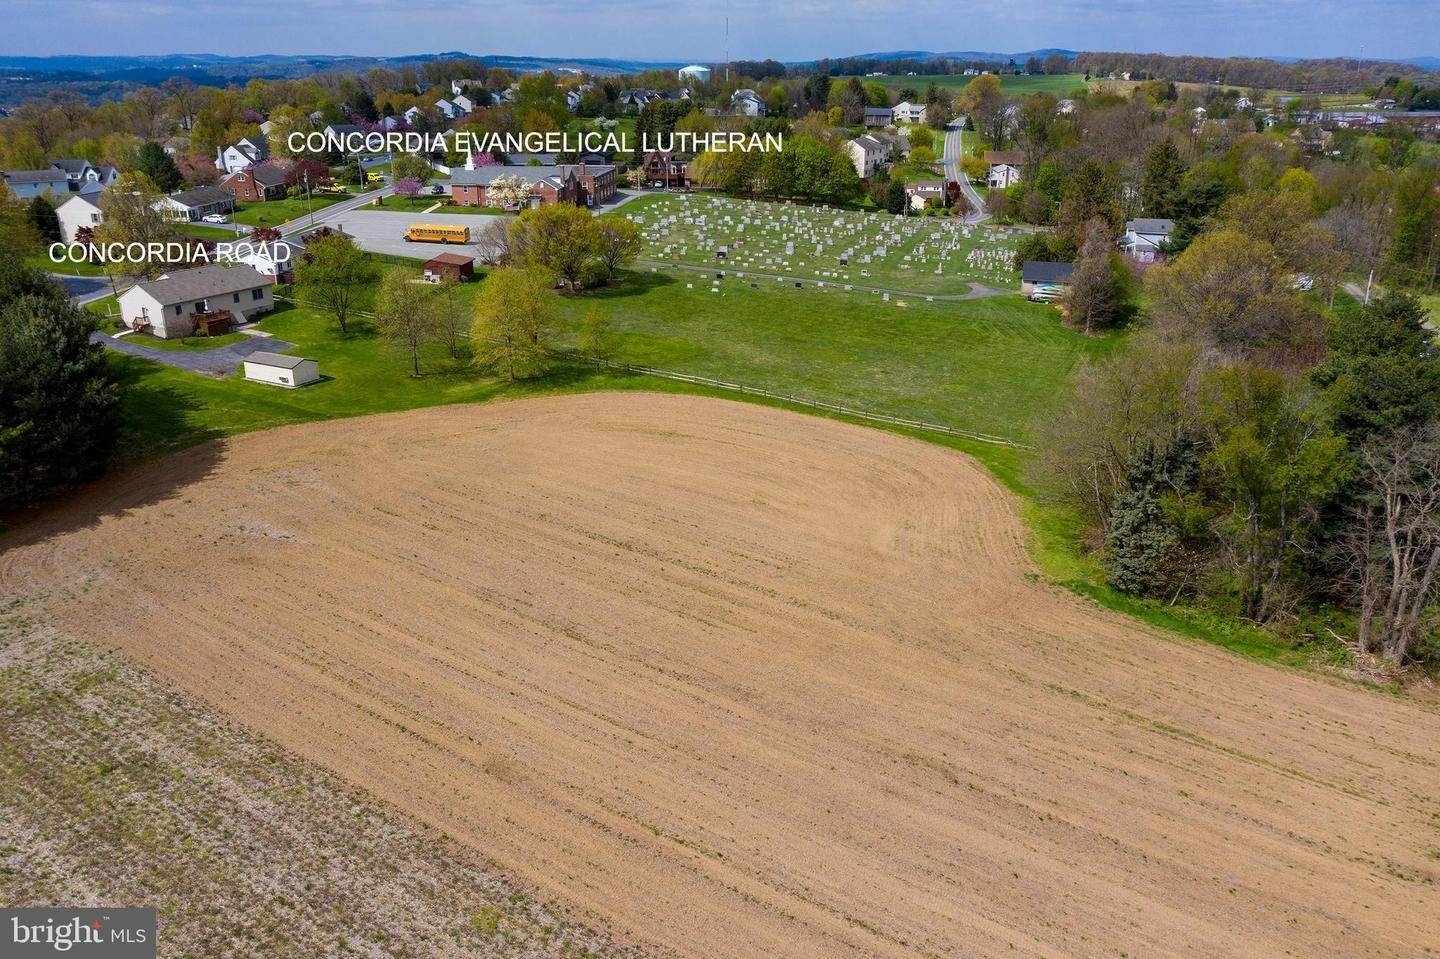 3. Land for Sale at 421 HEMPFIELD HILL RD #LOT # 6 Columbia, Pennsylvania 17512 United States